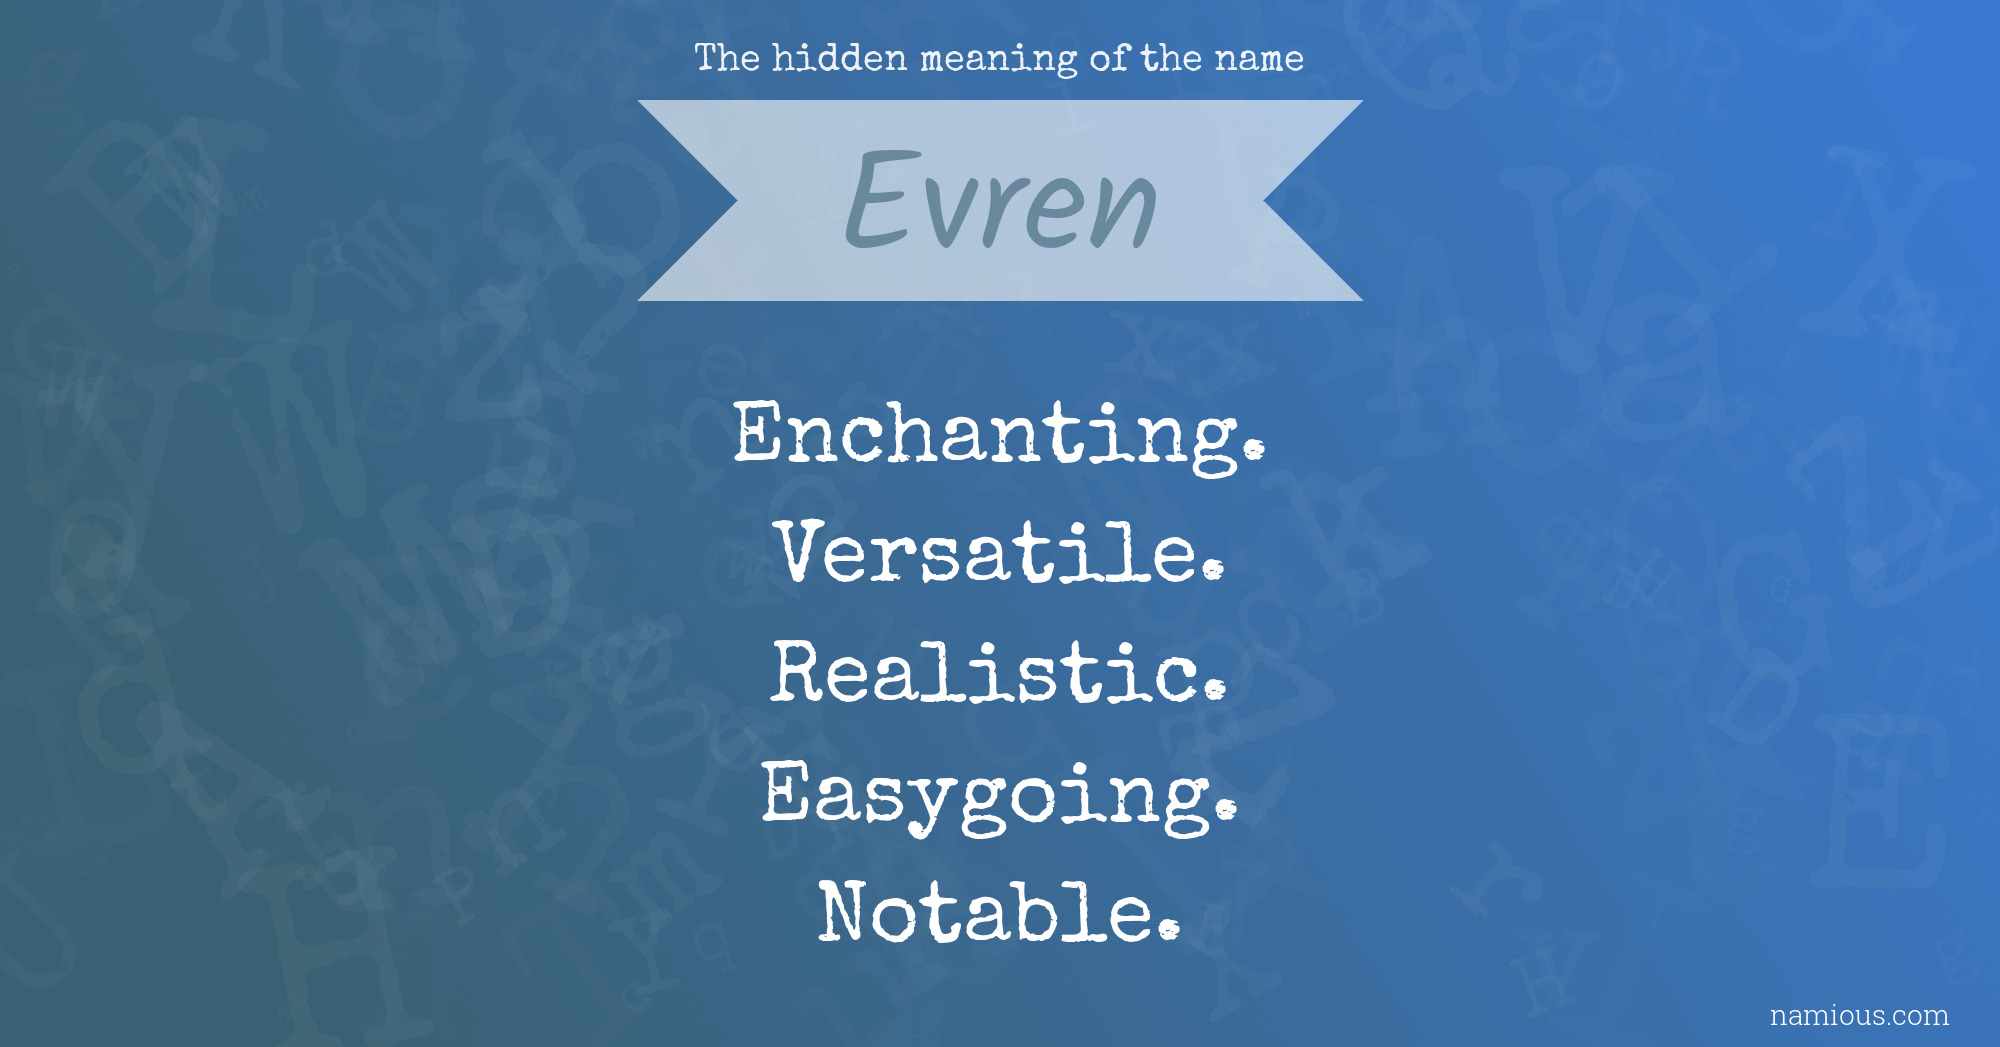 The hidden meaning of the name Evren